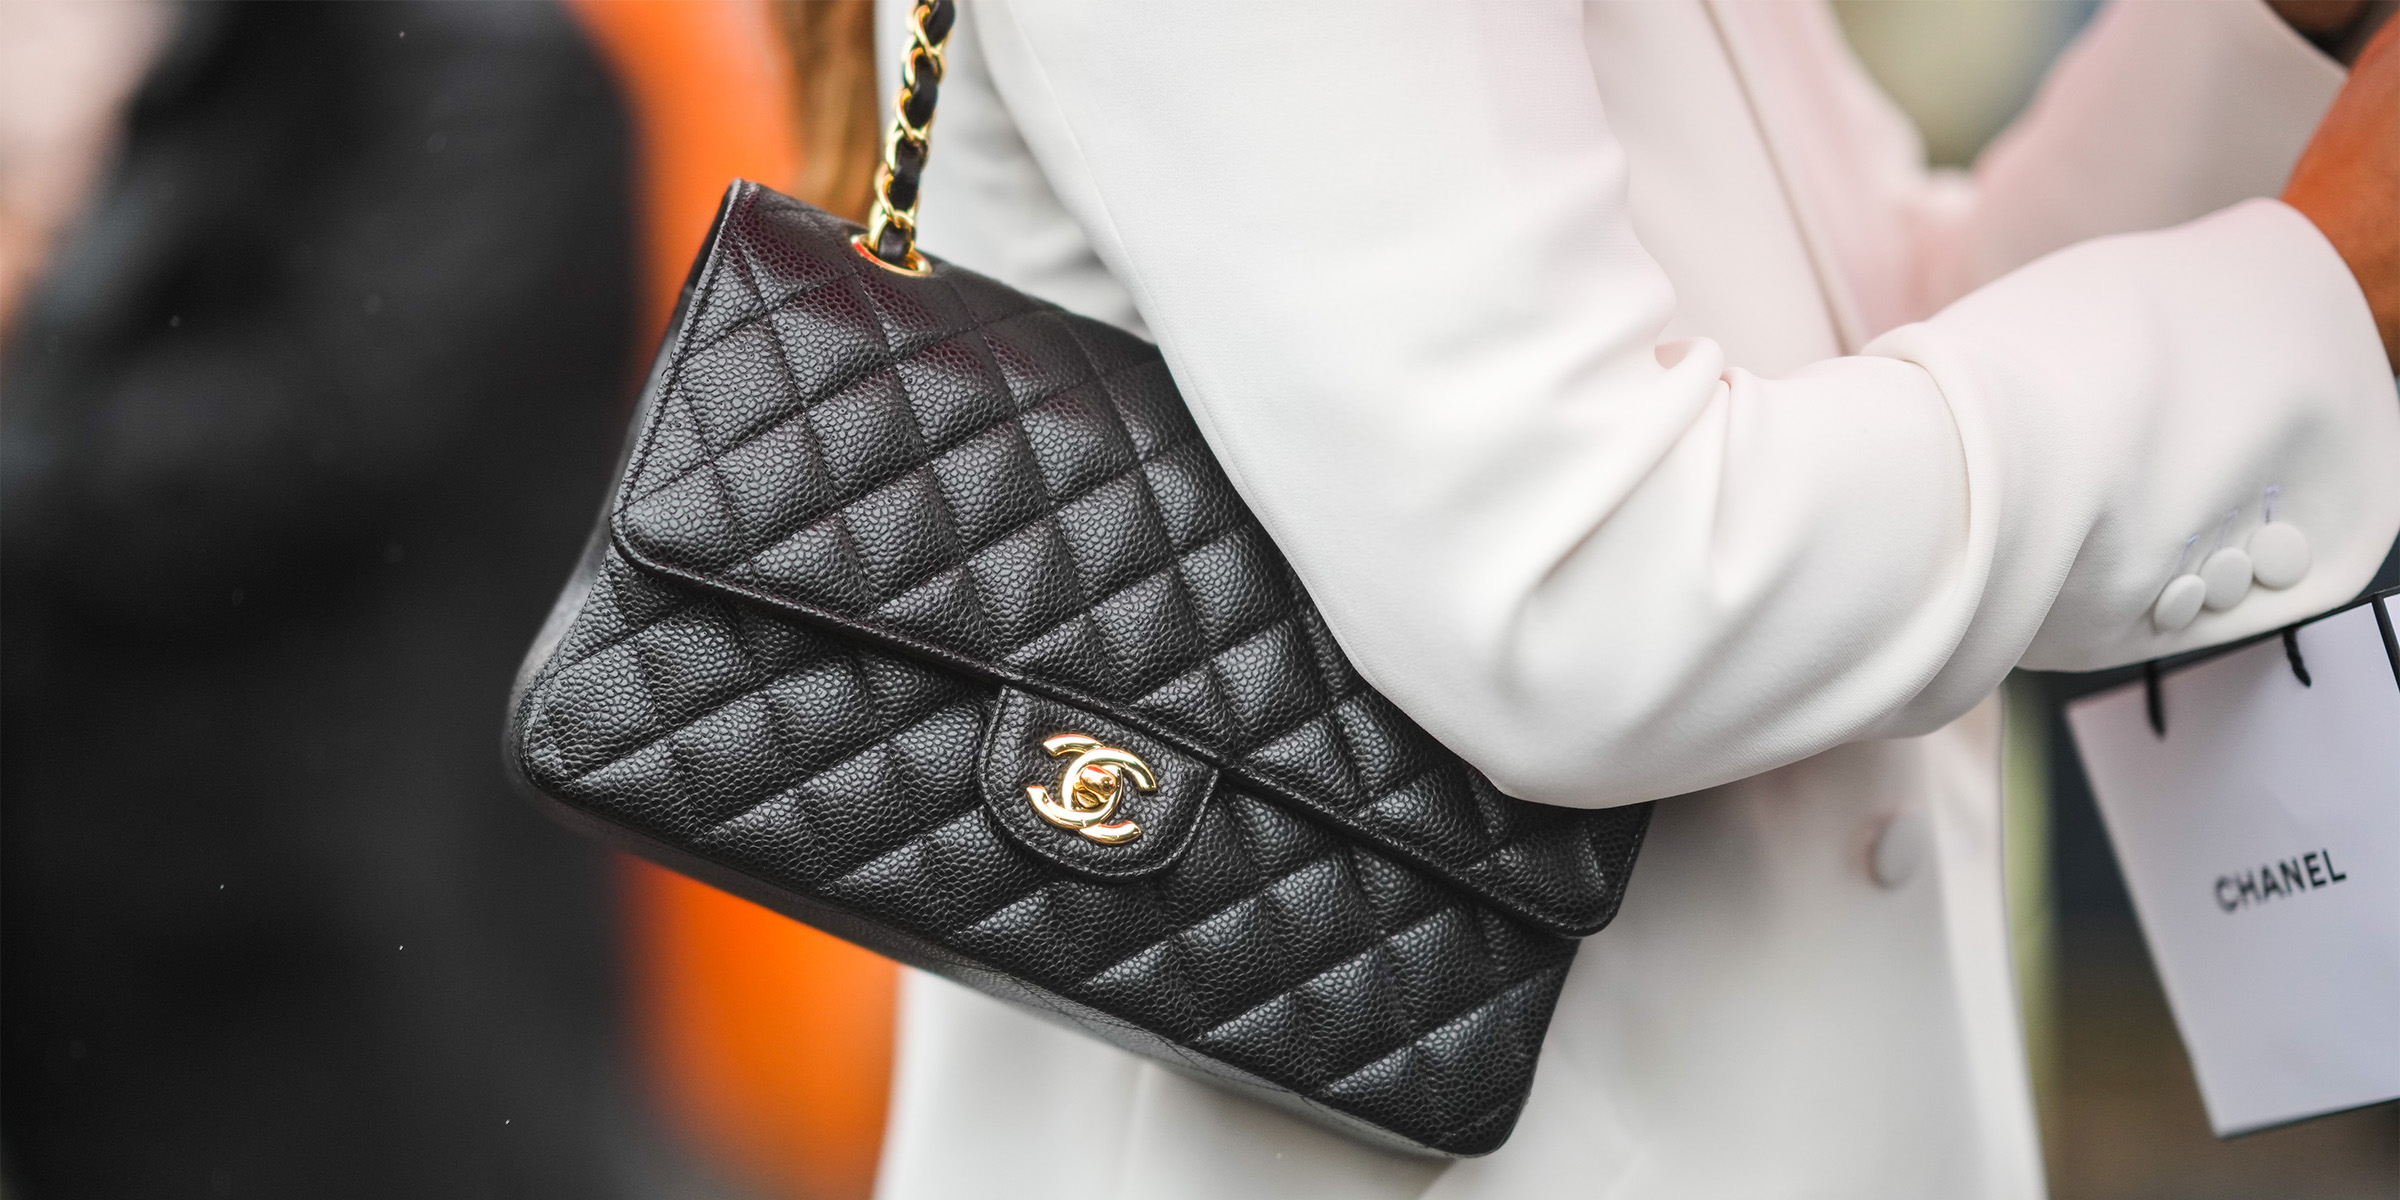 The Best Chanel Purse at Every Price, Handbags and Accessories